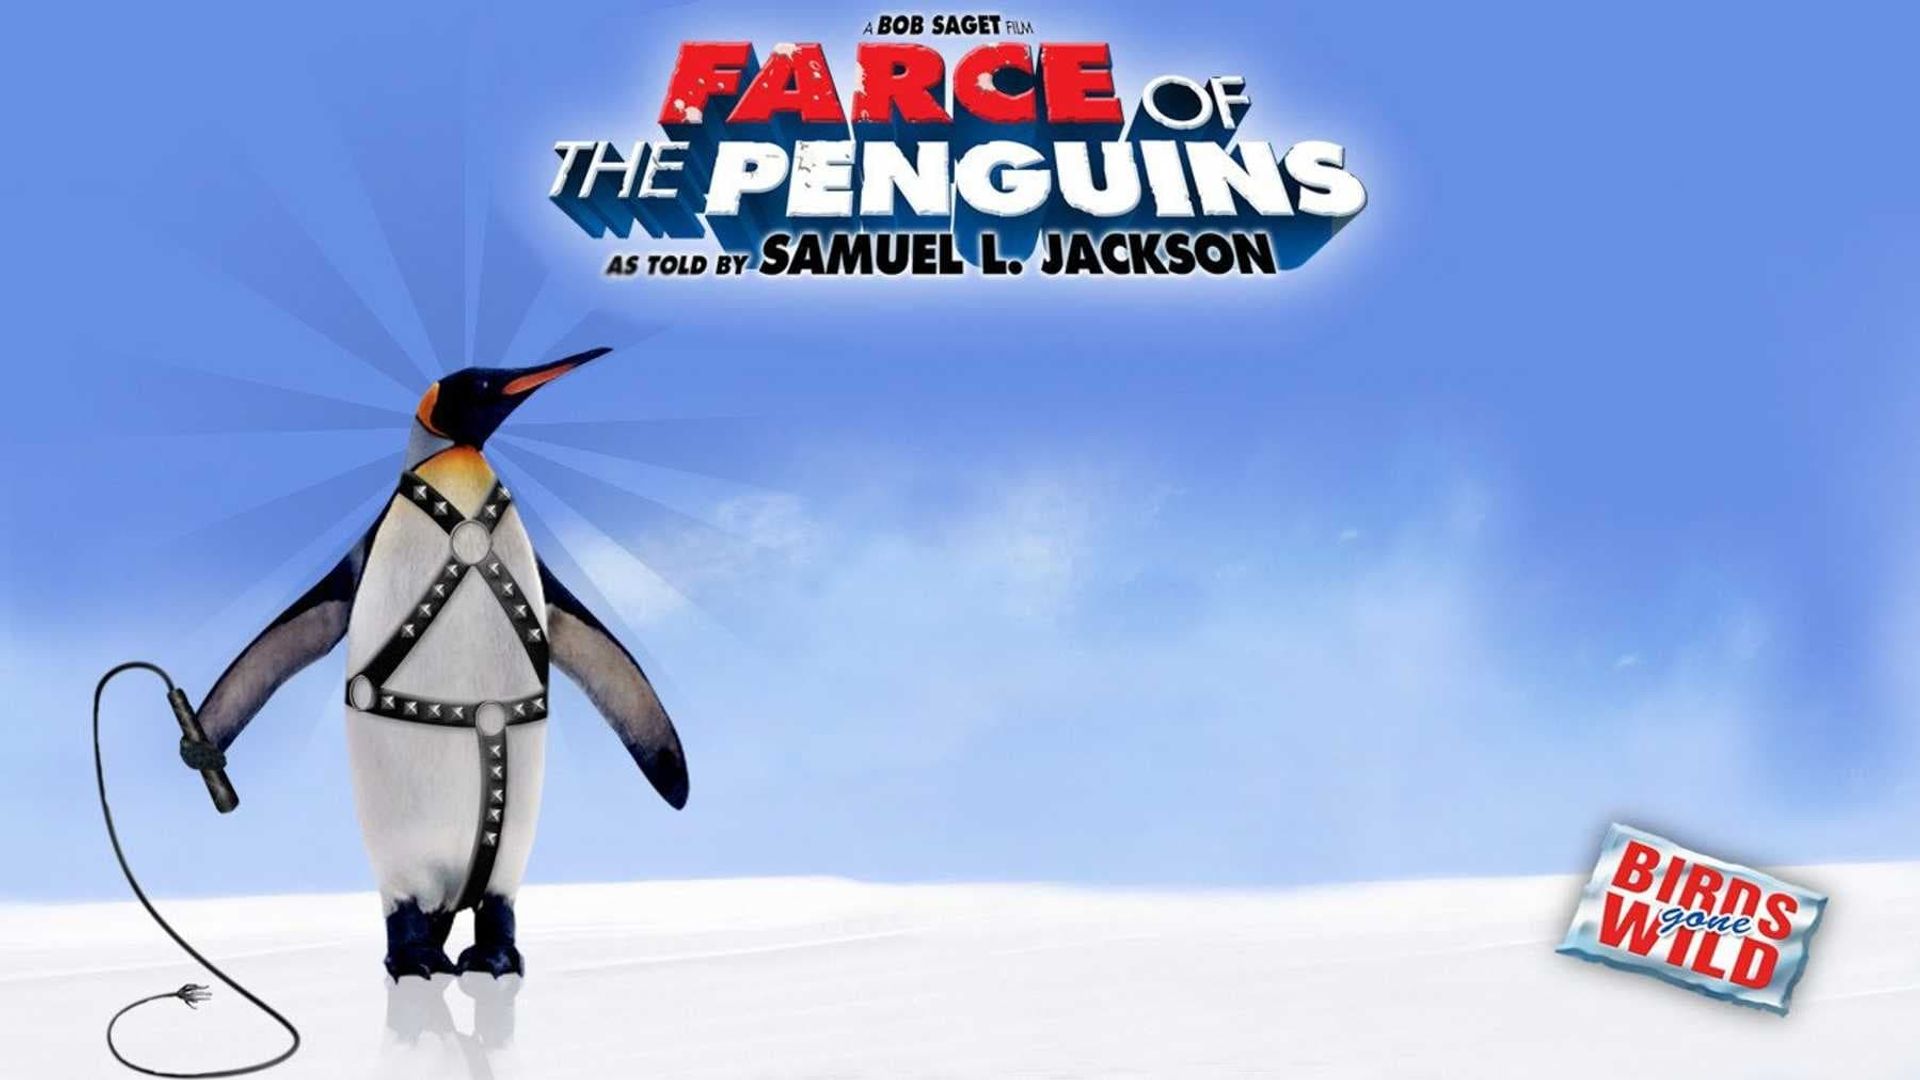 Farce of the Penguins background